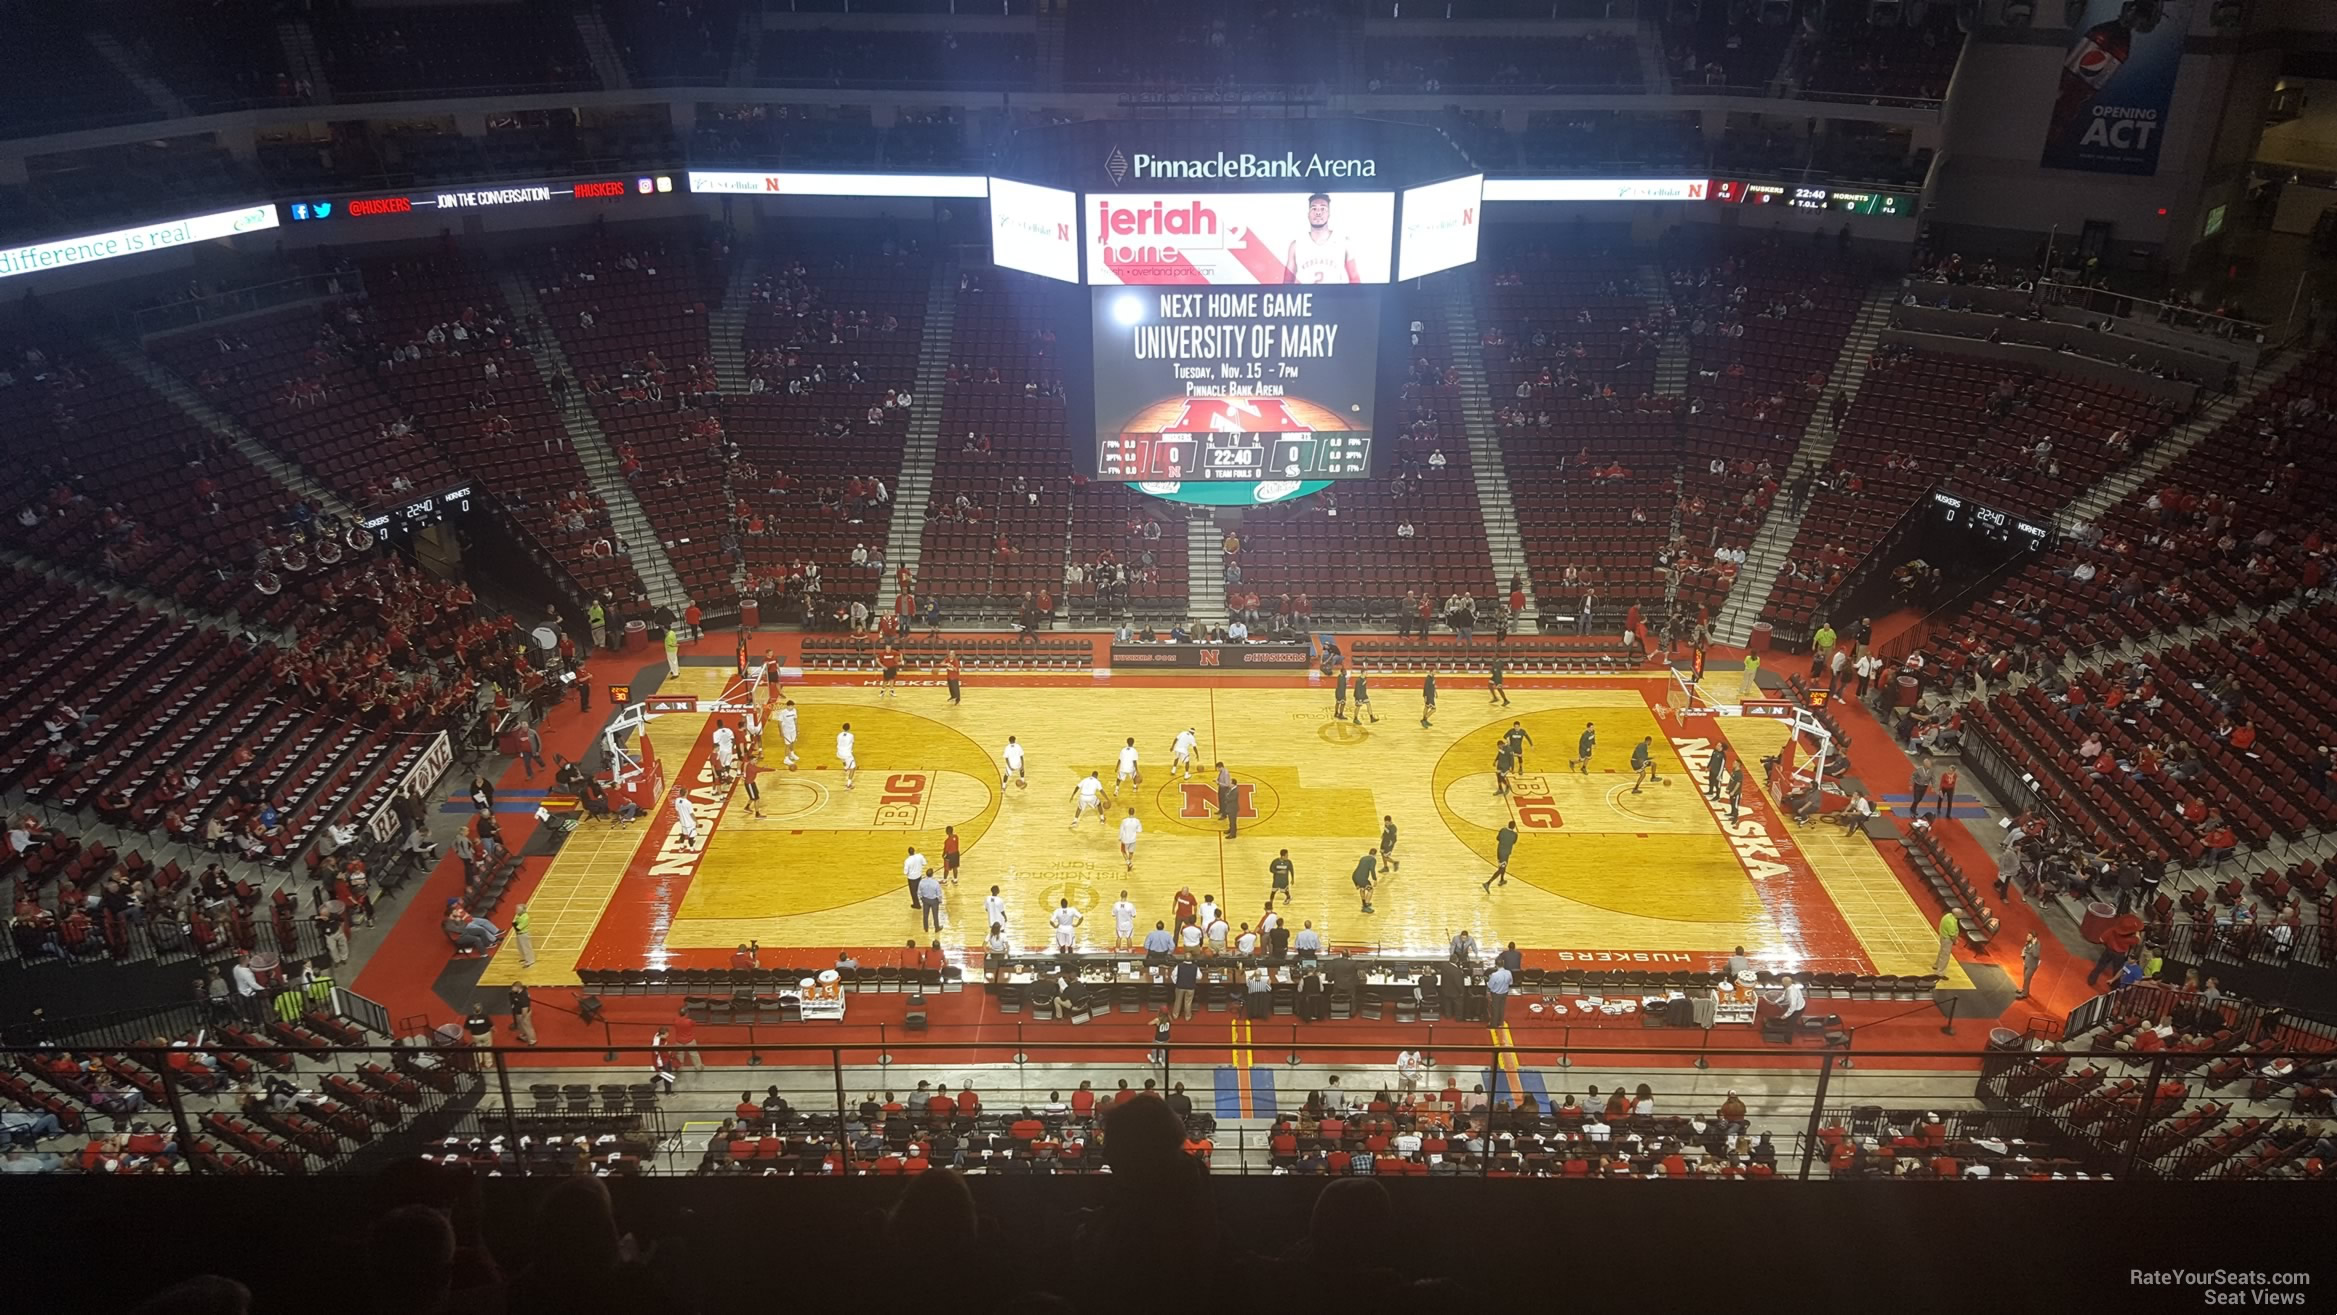 section 304, row 6 seat view  for basketball - pinnacle bank arena